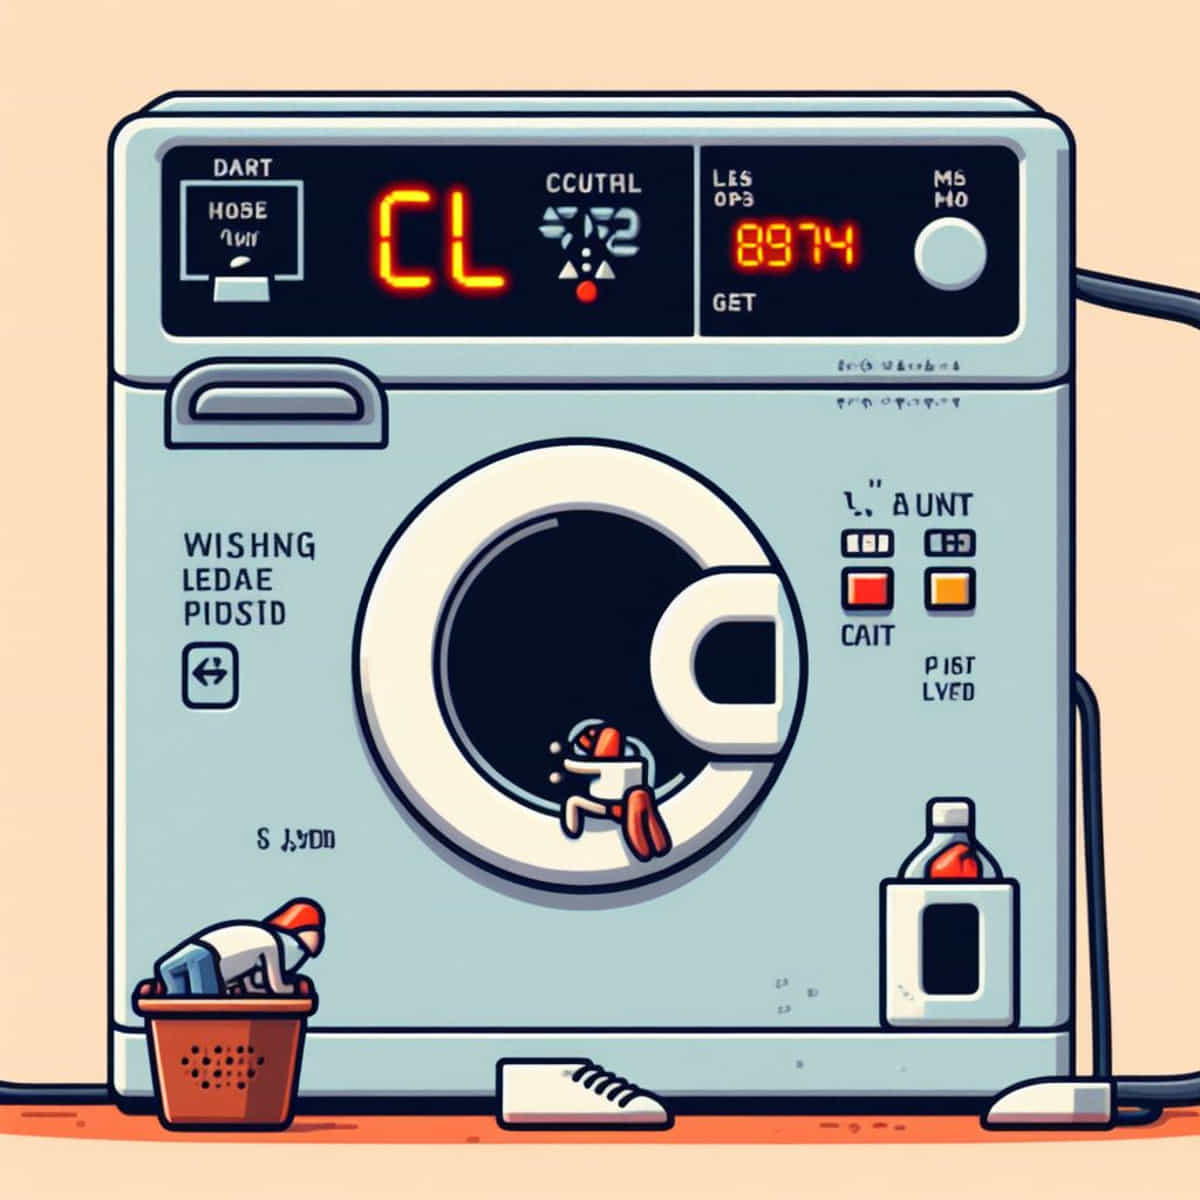 What does CL mean on washing machine